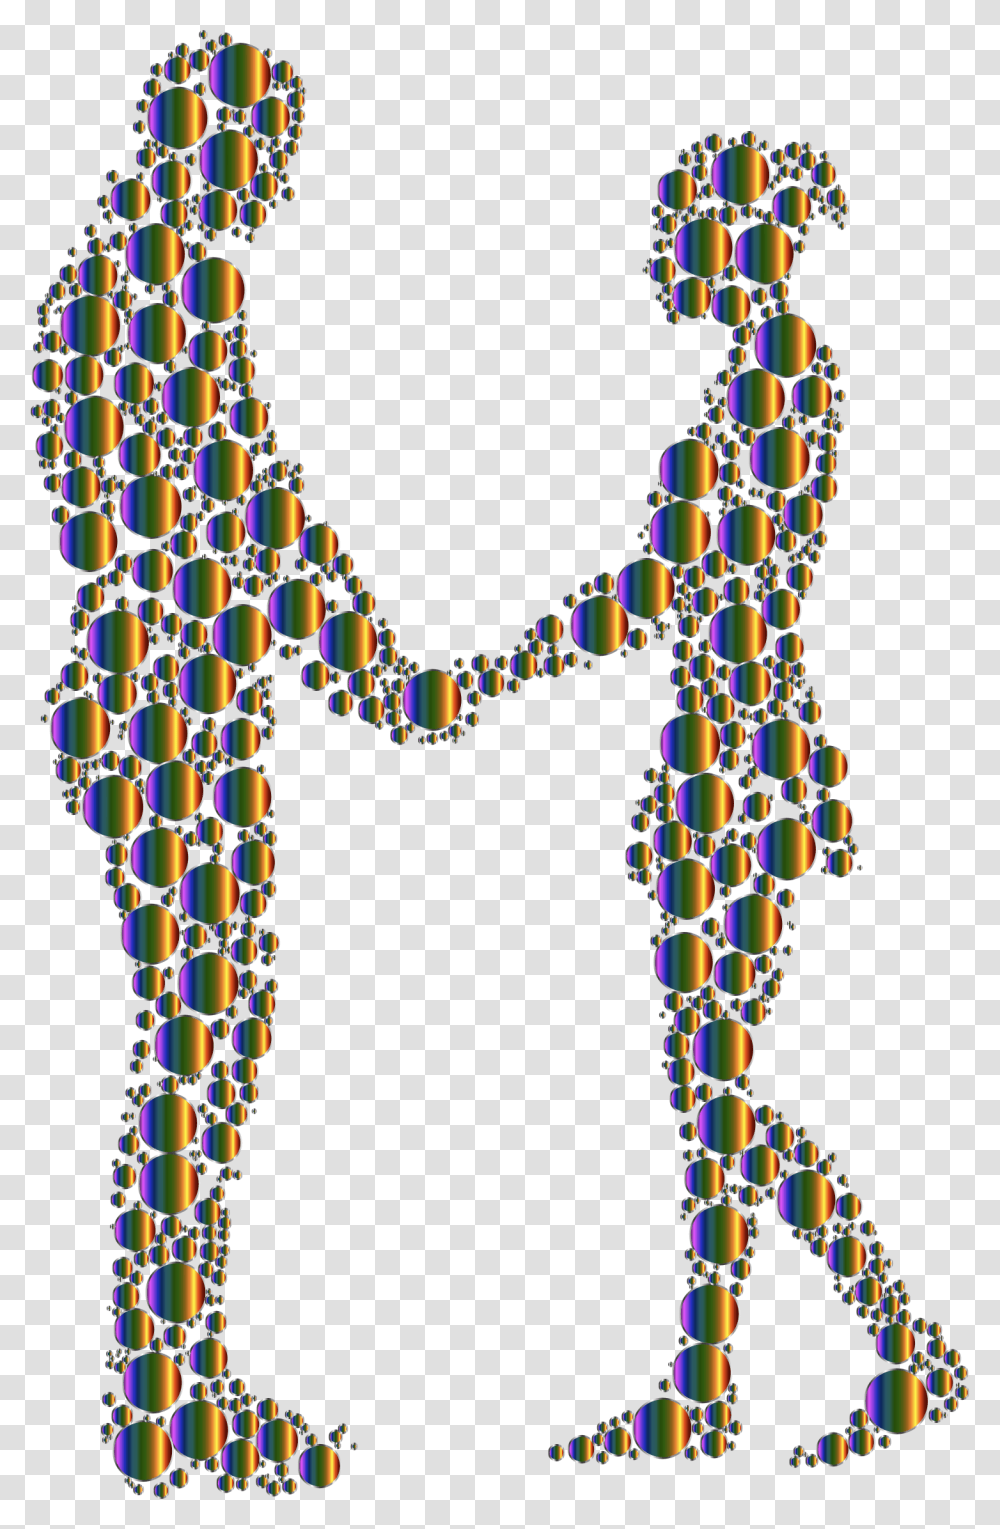 Silhouette Couple Holding Hands Clipart Download Couple Silhouette Holding Hands, Pants, Costume, Building Transparent Png